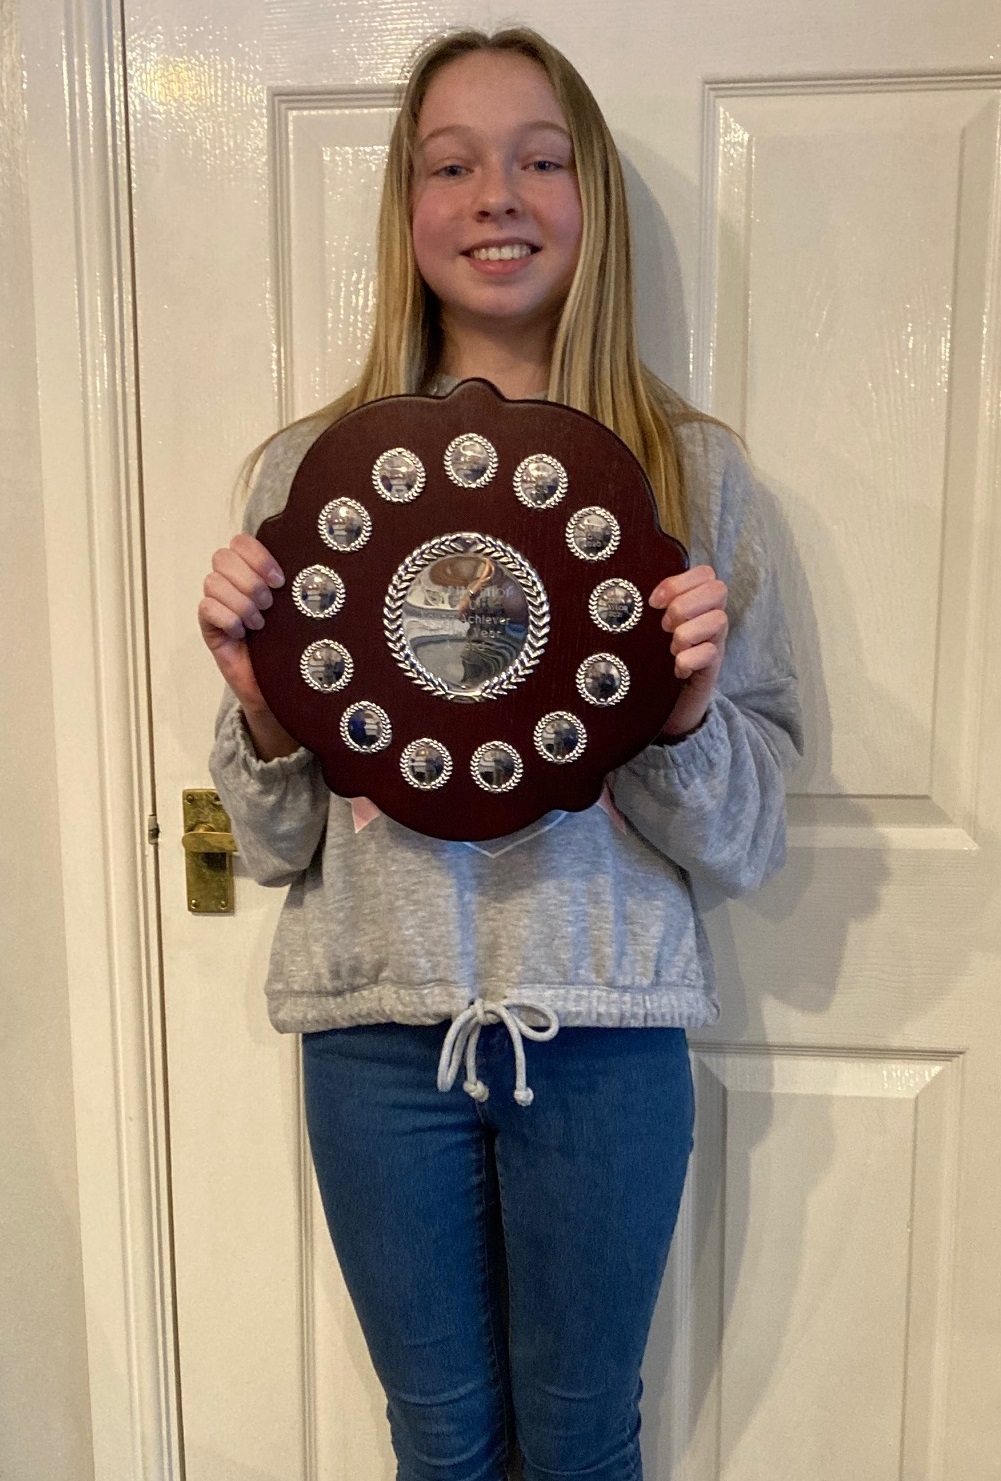 Xena Taylor won the Young Achiever of the Year trophy